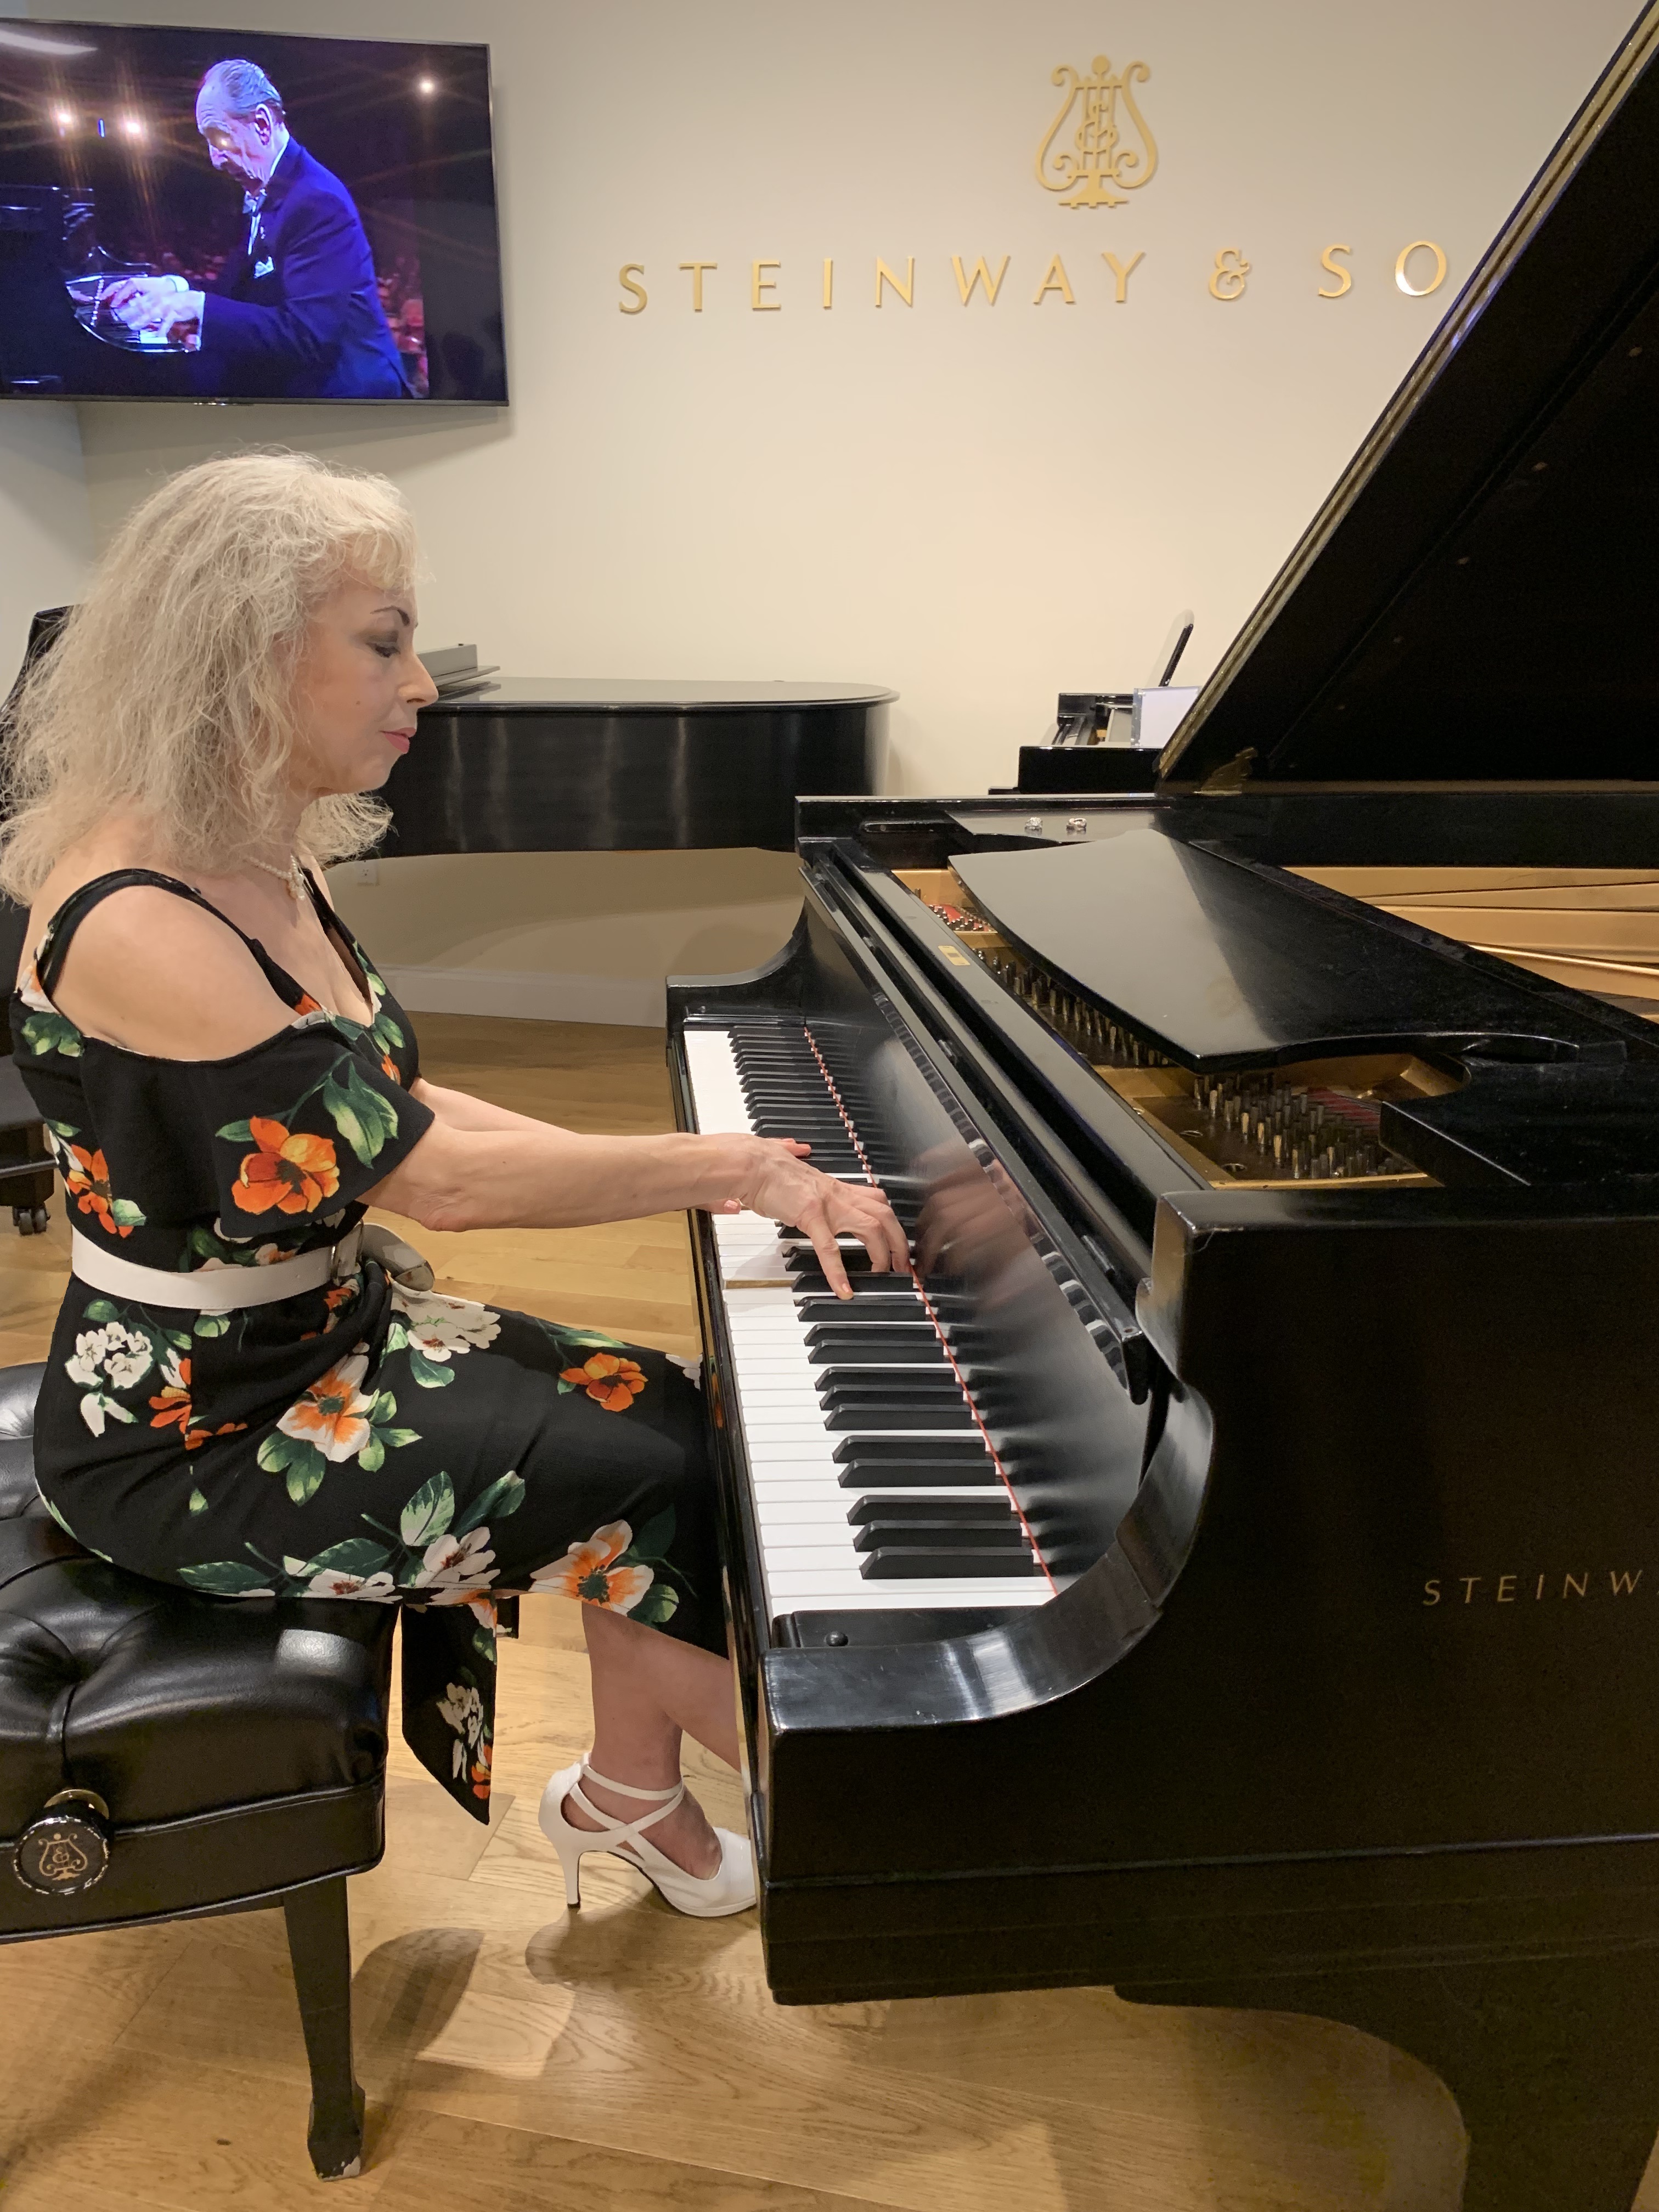 Playing on the Steinway Piano of Vladimir Horowitz - August 15, 2019